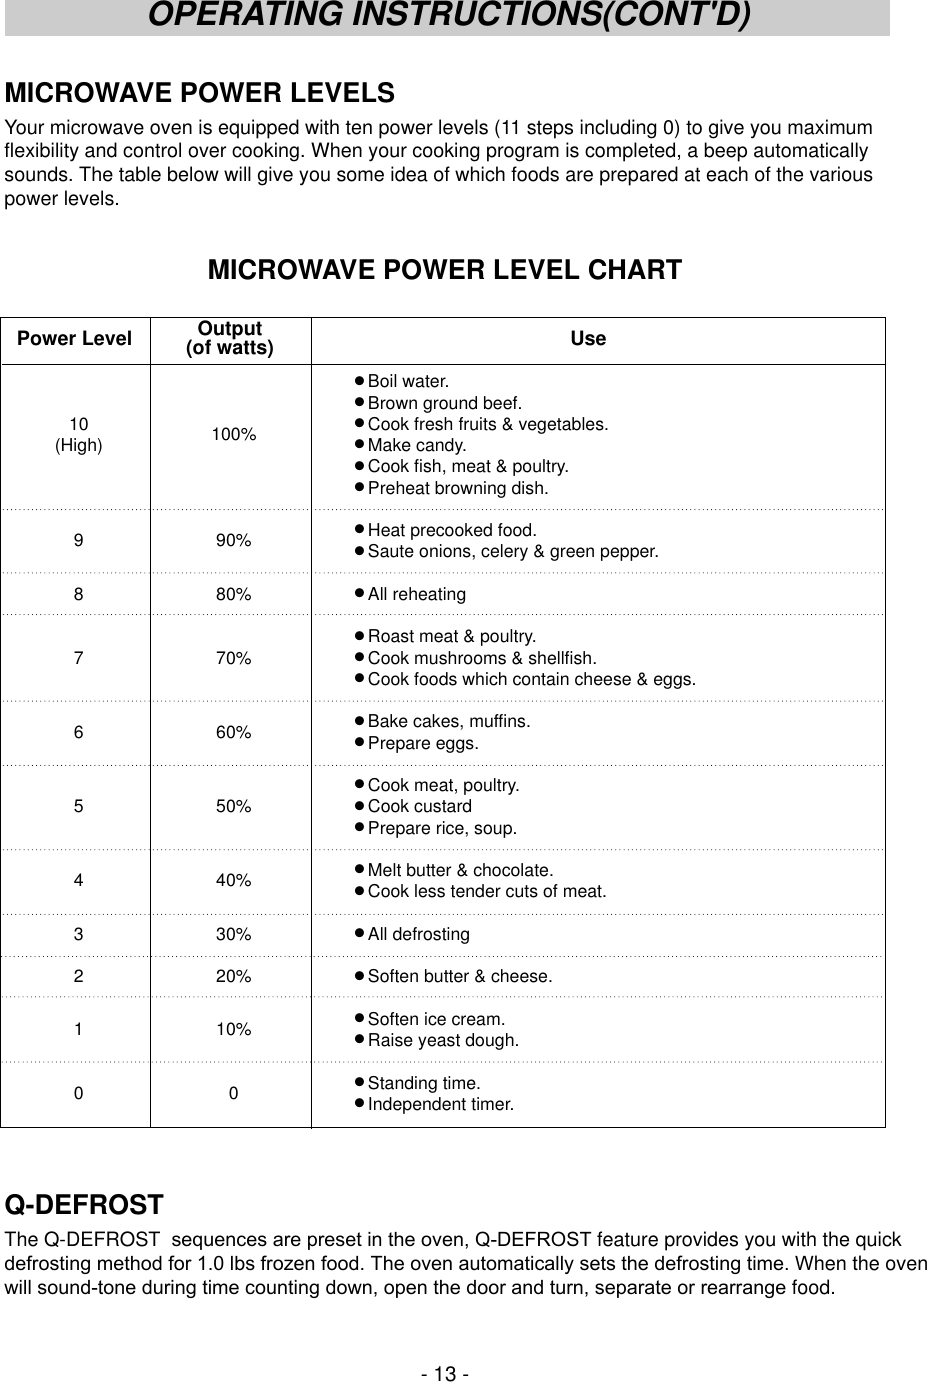 MICROWAVE POWER LEVELSYour microwave oven is equipped with ten power levels (11 steps including 0) to give you maximumflexibility and control over cooking. When your cooking program is completed, a beep automaticallysounds. The table below will give you some idea of which foods are prepared at each of the variouspower levels.MICROWAVE POWER LEVEL CHARTQ-DEFROSTThe Q-DEFROST  sequences are preset in the oven, Q-DEFROST feature provides you with the quickdefrosting method for 1.0 lbs frozen food. The oven automatically sets the defrosting time. When the oven will sound-tone during time counting down, open the door and turn, separate or rearrange food. - 13 -OPERATING INSTRUCTIONS(CONT&apos;D)Power Level Use● Boil water.● Brown ground beef.10 100% ● Cook fresh fruits &amp; vegetables.(High) ● Make candy.● Cook fish, meat &amp; poultry.● Preheat browning dish.9 90% ● Heat precooked food.● Saute onions, celery &amp; green pepper.8 80% ● All reheating● Roast meat &amp; poultry.7 70% ● Cook mushrooms &amp; shellfish.● Cook foods which contain cheese &amp; eggs.6 60% ● Bake cakes, muffins.● Prepare eggs.● Cook meat, poultry.5 50% ● Cook custard● Prepare rice, soup.4 40% ● Melt butter &amp; chocolate.● Cook less tender cuts of meat.3 30% ● All defrosting2 20% ● Soften butter &amp; cheese.1 10% ● Soften ice cream.● Raise yeast dough.00● Standing time.● Independent timer.Output (of watts)